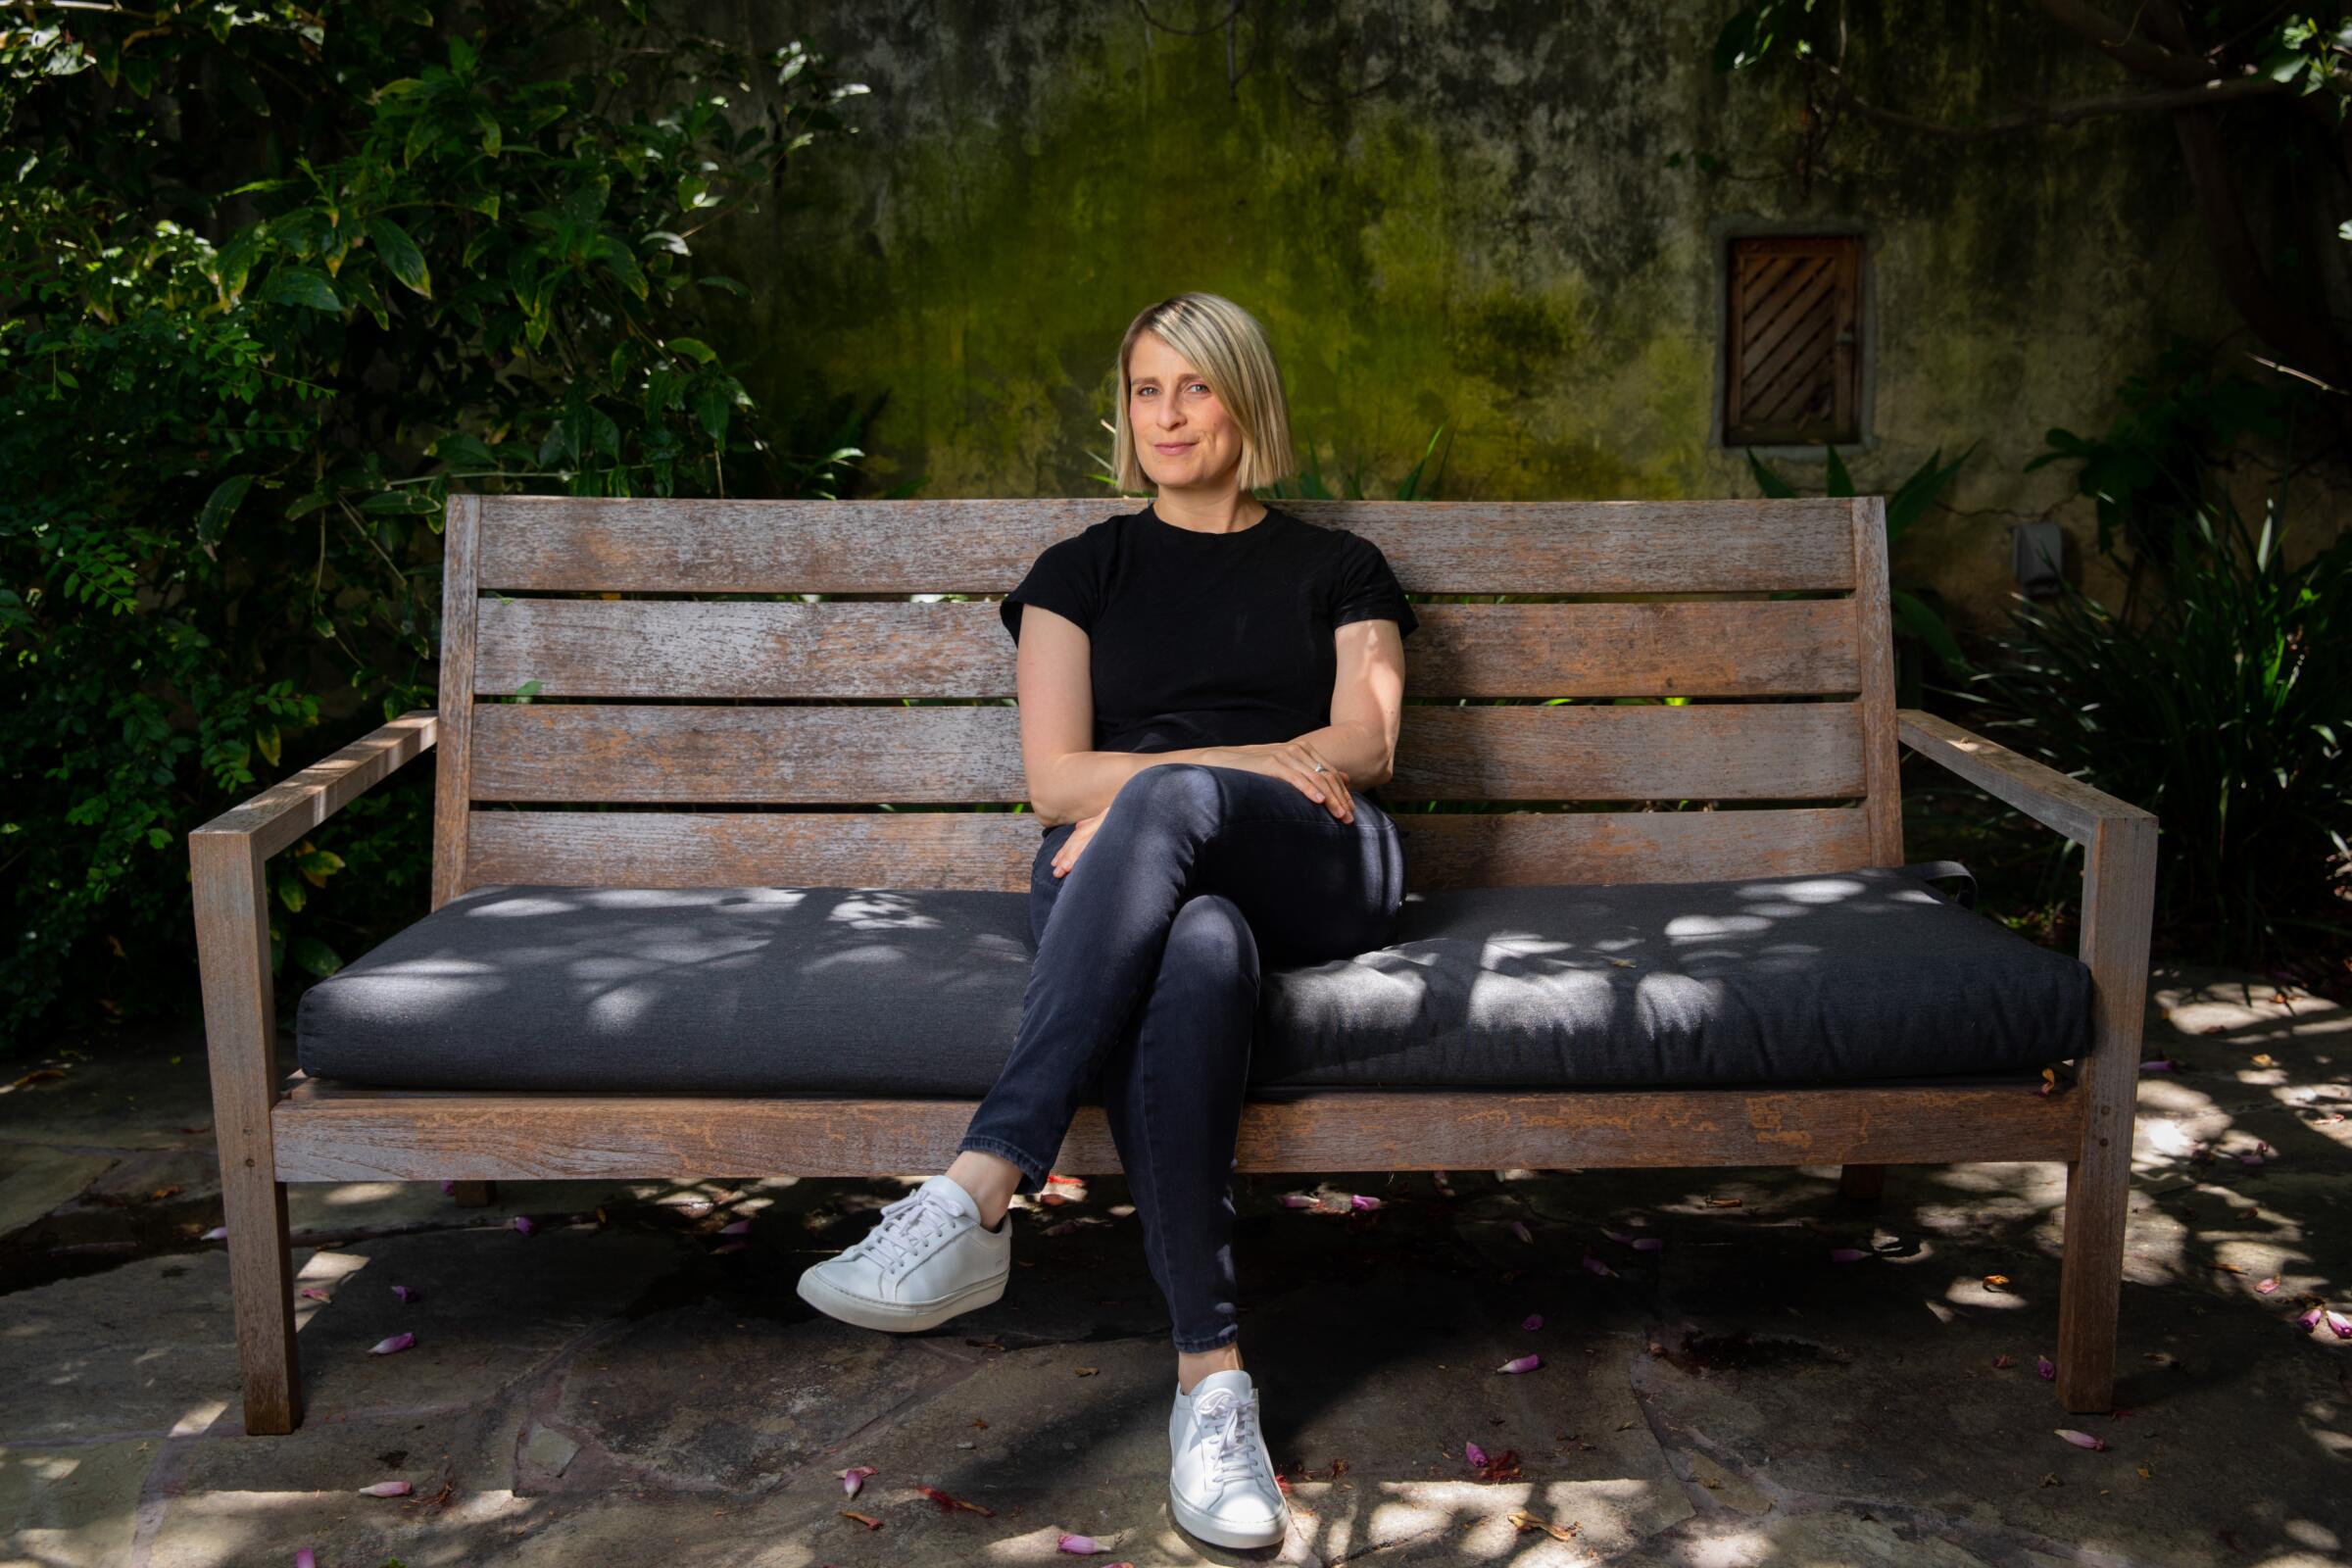 Liz Feldman, showrunner for the series "Dead to Me" on Netflix, is photographed in the backyard of her Los Angeles home during the COVID-19 pandemic. 